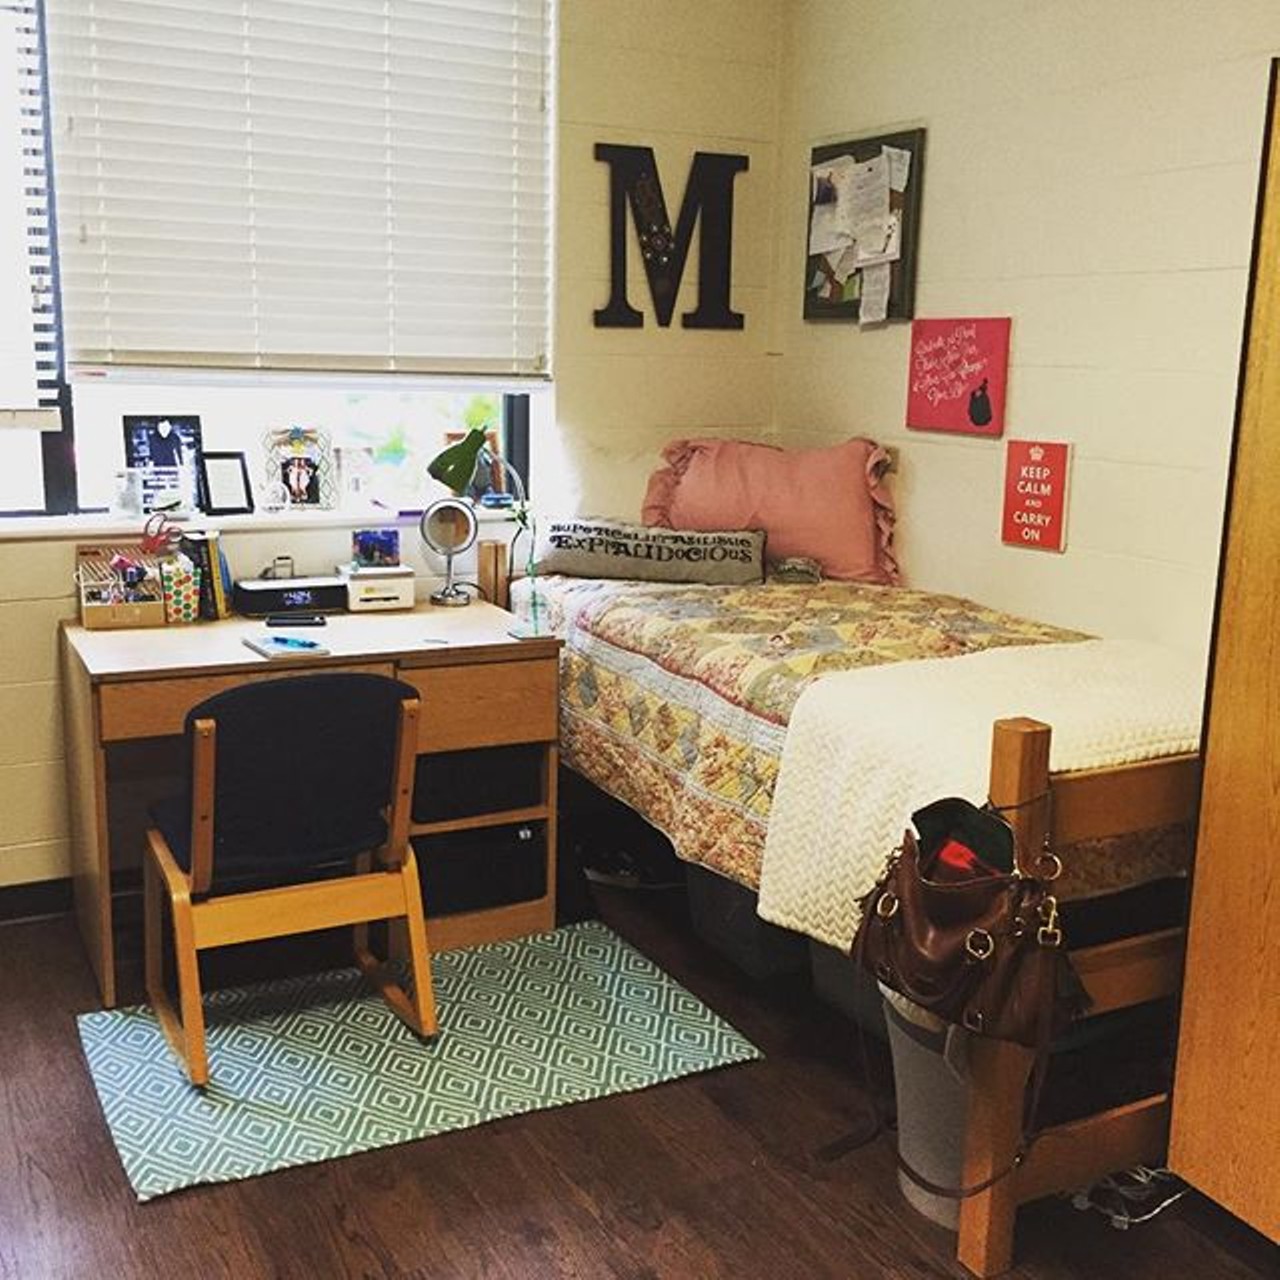 As we all know, Rollins dorm rooms are way nicer than UCF's | Orlando ...